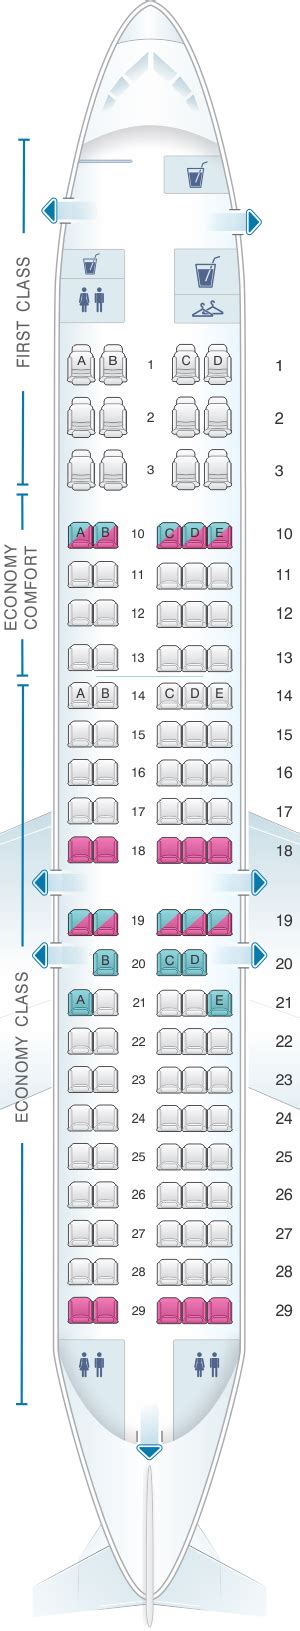 Delta airline seating chart. The Condor's fleet includes four Airbus A330-900neo aircrafts. Airline operates a fleet of aircraft for both domestic and international flights, including the Airbus A330-900neo. The A330-900neo is the newest addition to airline's fleet and is designed for medium to long-haul flights. The aircraft has a seating capacity of up to 298 passengers ... 